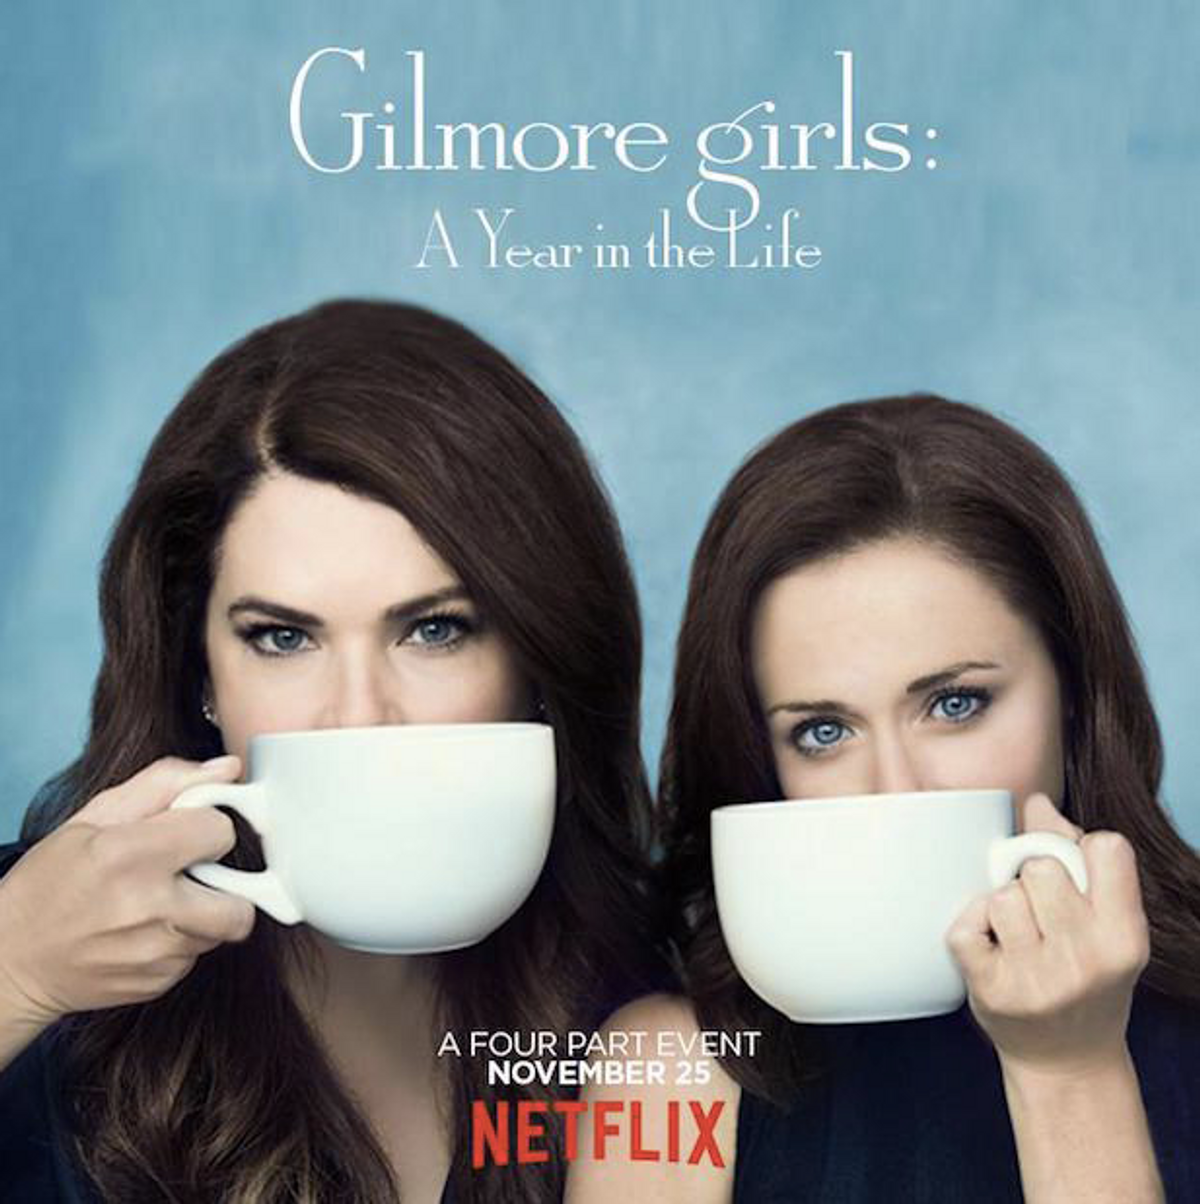 42 Thoughts While Watching Gilmore Girls: A Year in the Life